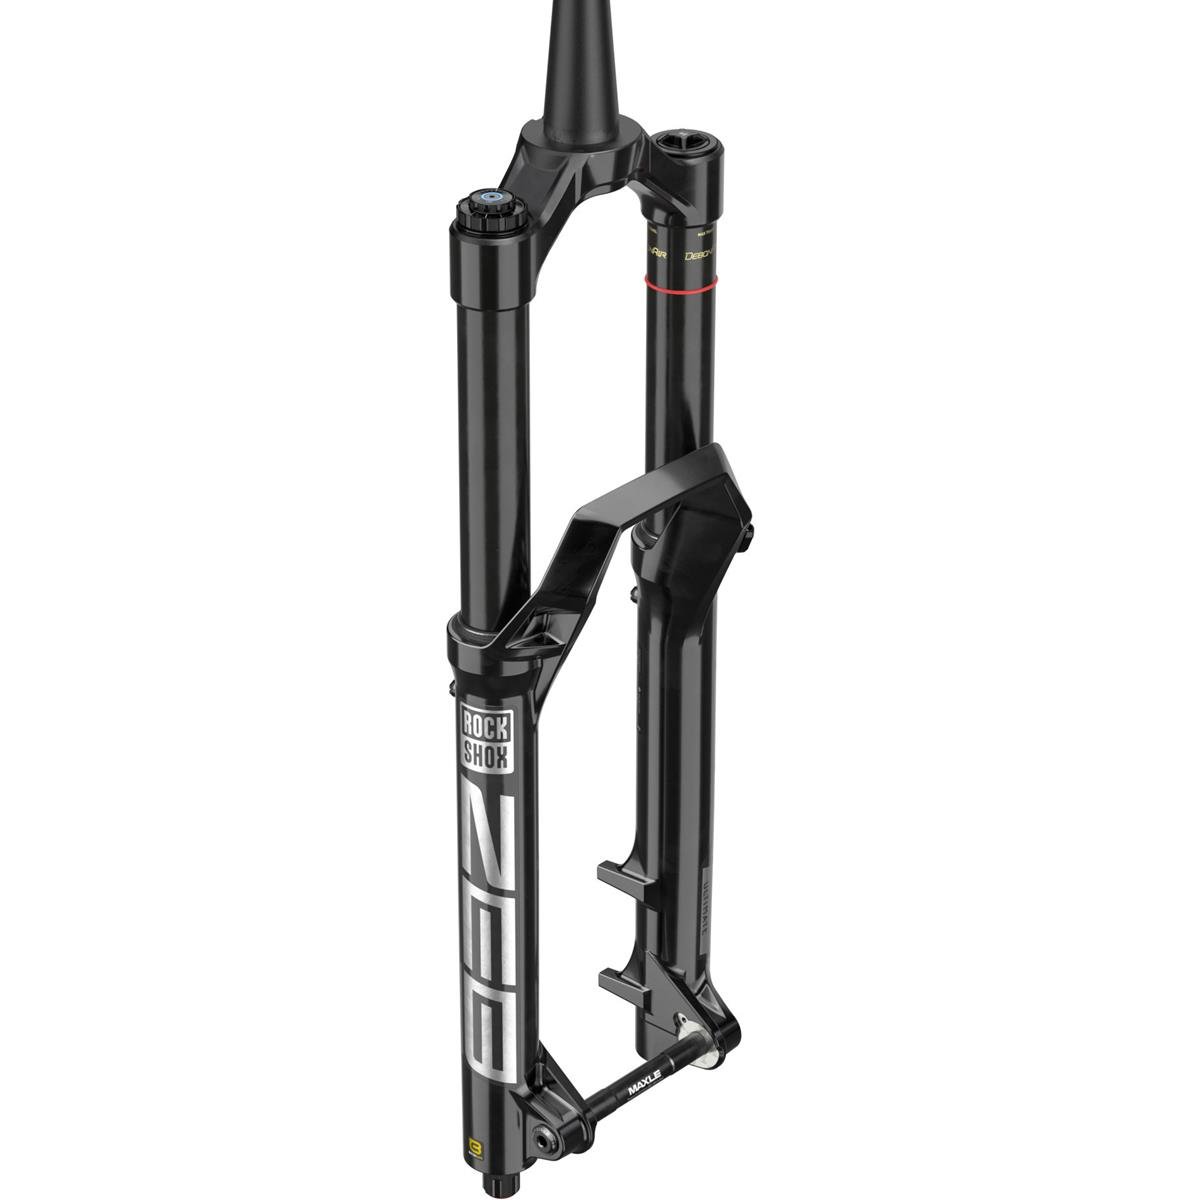 RockShox Forcella ZEB Ultimate Charger 3 RC2 27.5 Pollici, 15x110 mm, Nero, 44 mm Offset, 160 mm - 190 mm